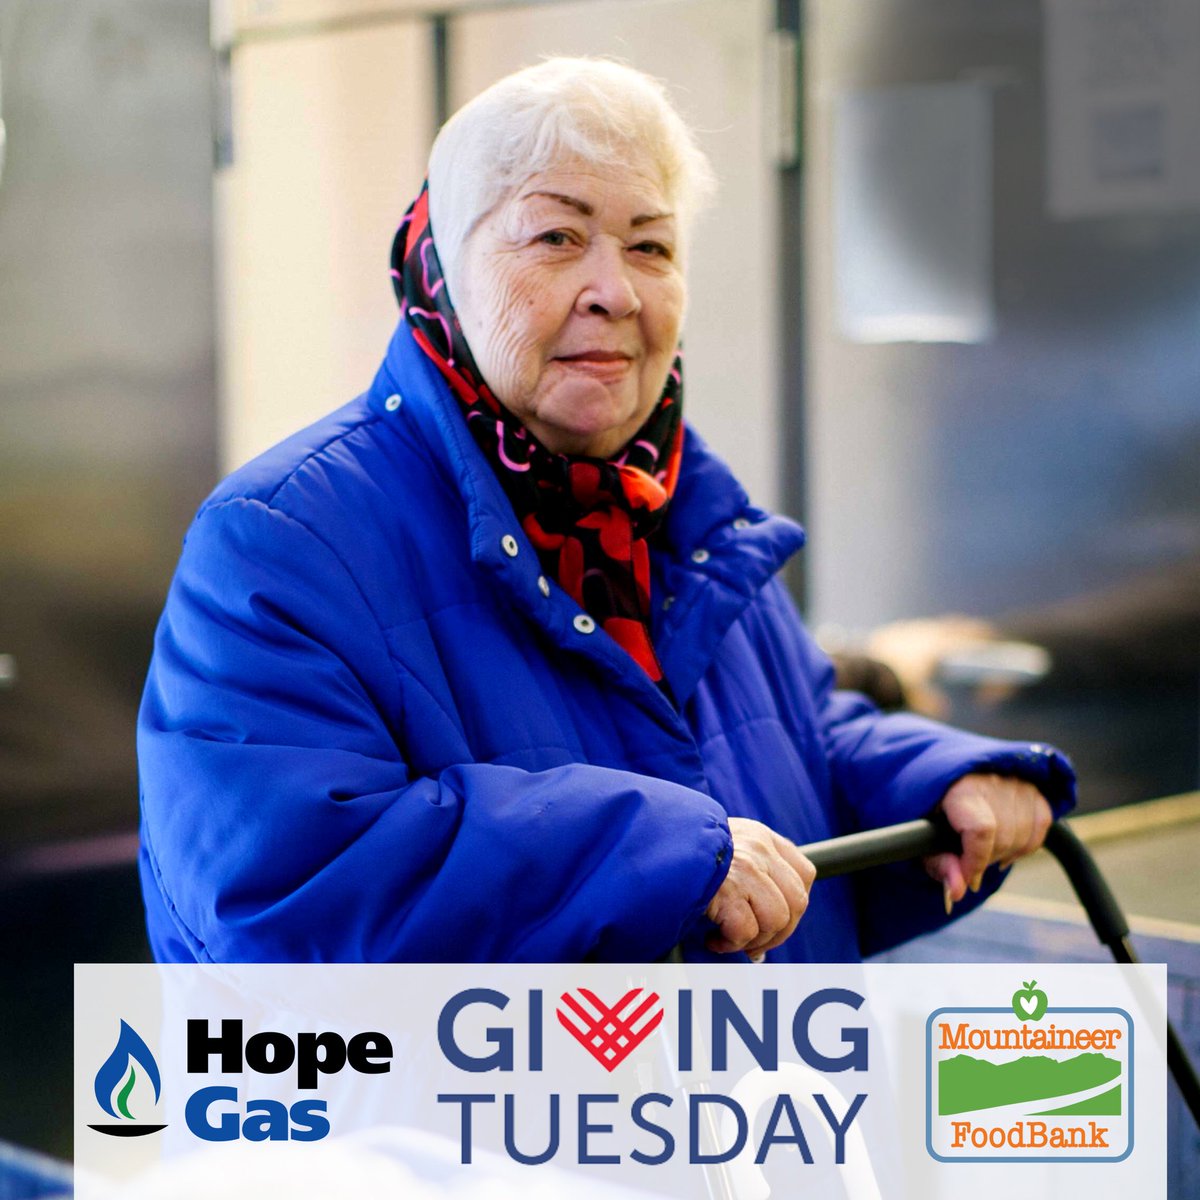 TOMORROW is #GivingTuesday and we need your help! 🚨❤️ Hope Gas has generously pledged to match donations up to $125,000 to support families across WV this holiday season. Every dollar donated will be doubled, making a huge impact! Donate here: bit.ly/3QP7LZ1